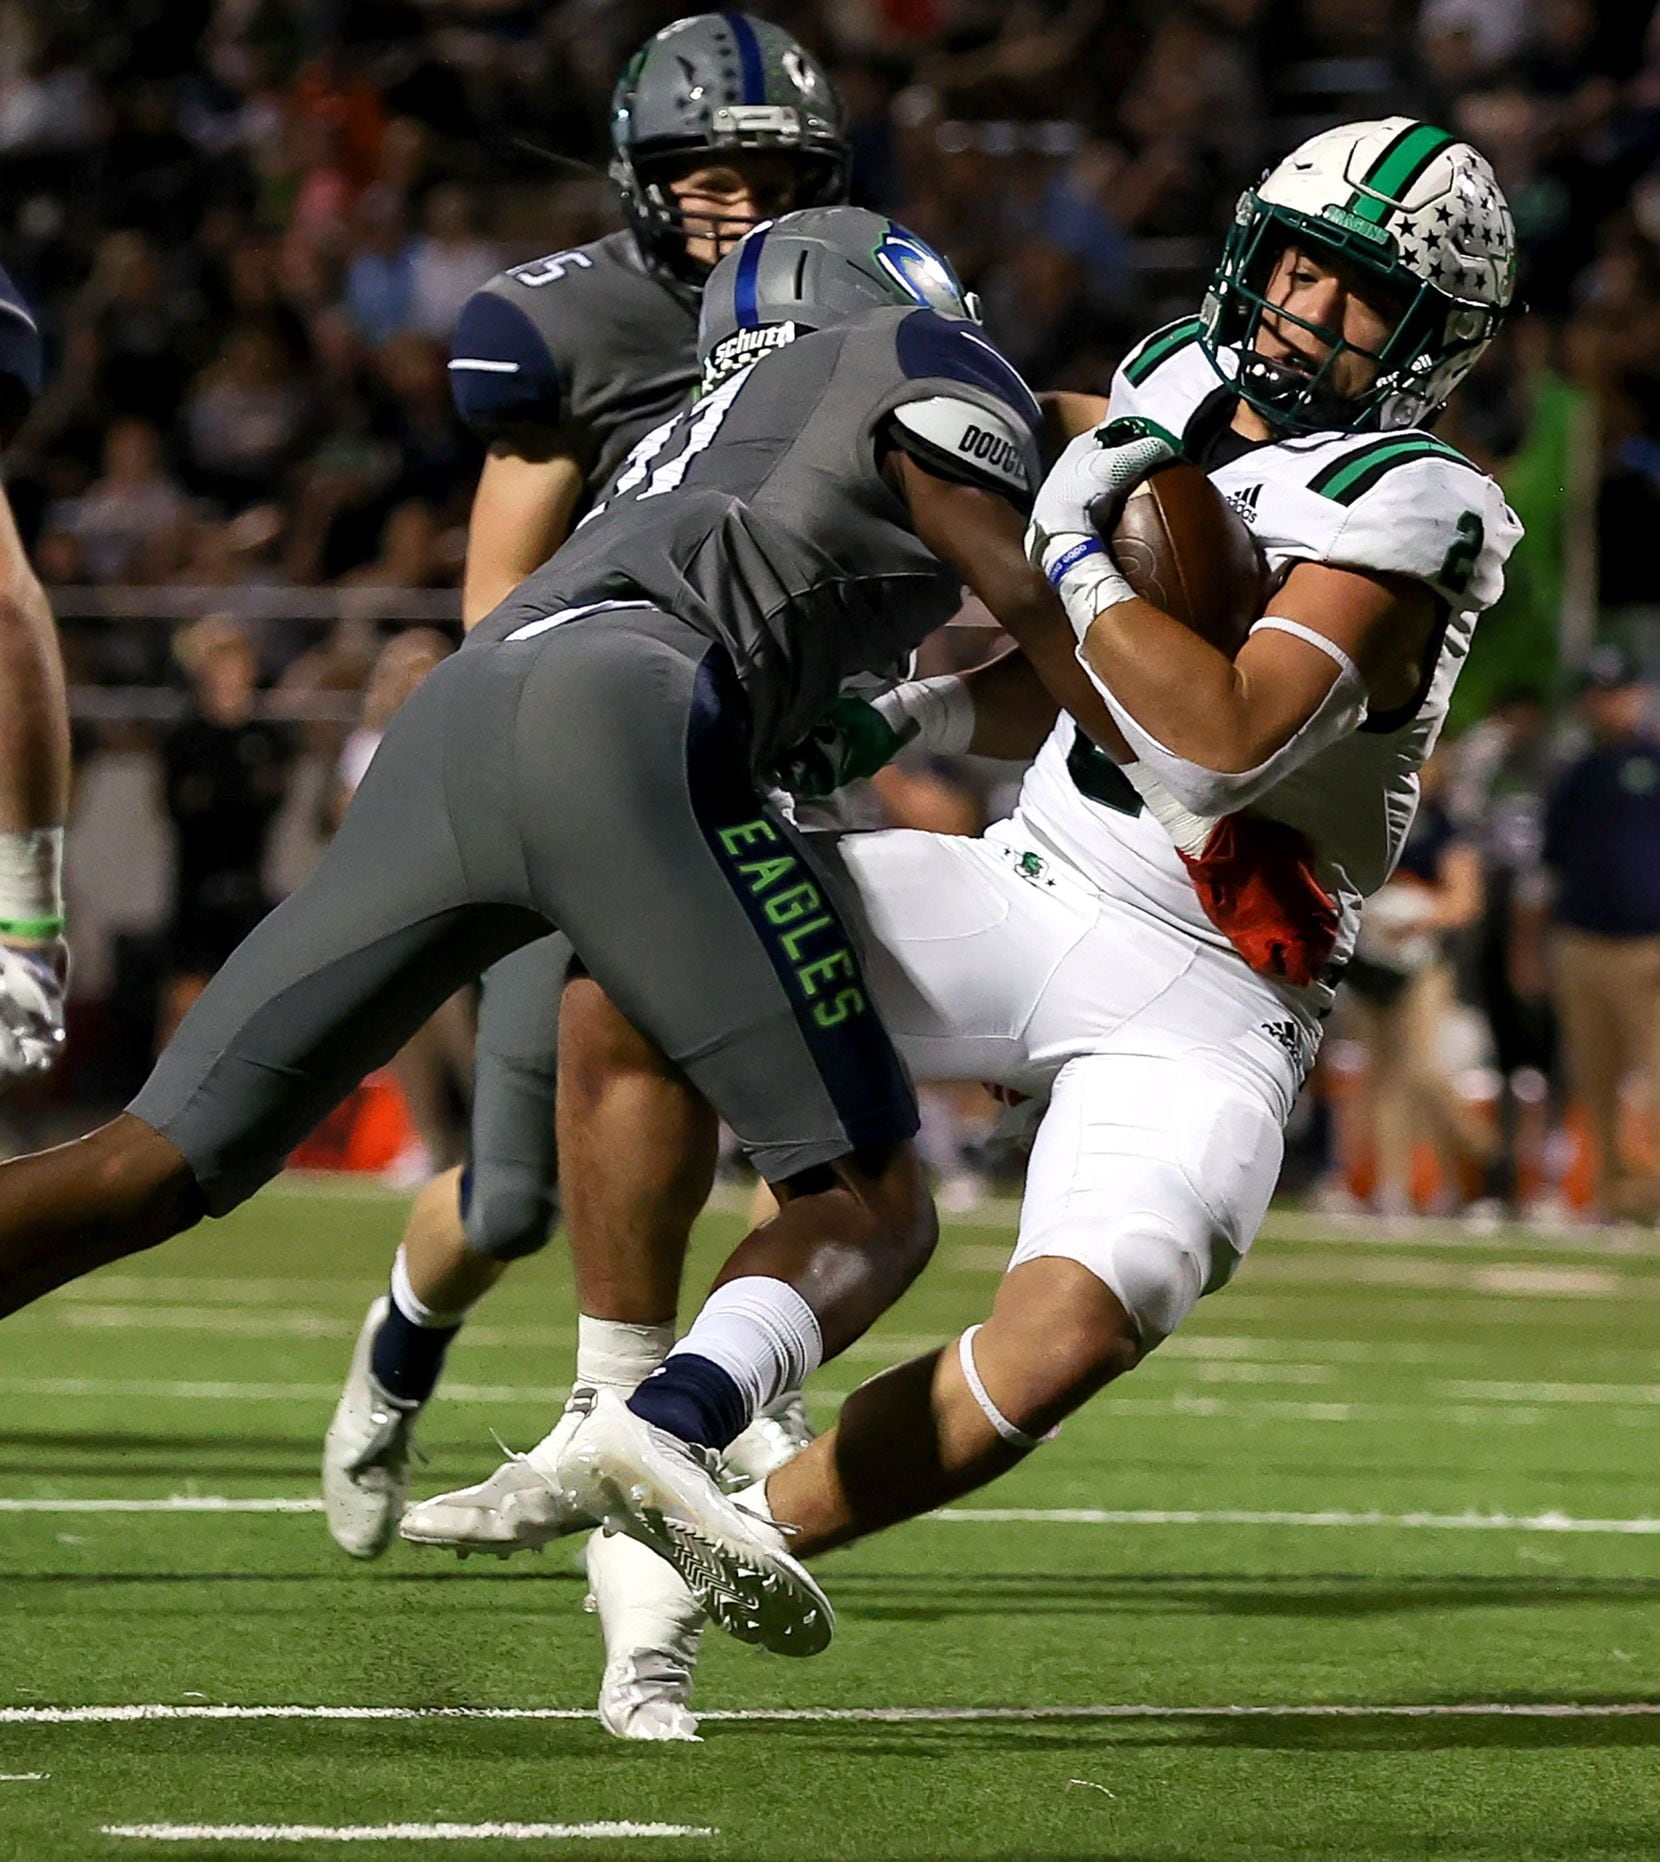 Tough Running Rb Owen Allen Powers Southlake Carroll To Victory Over Northwest Easton See Photos